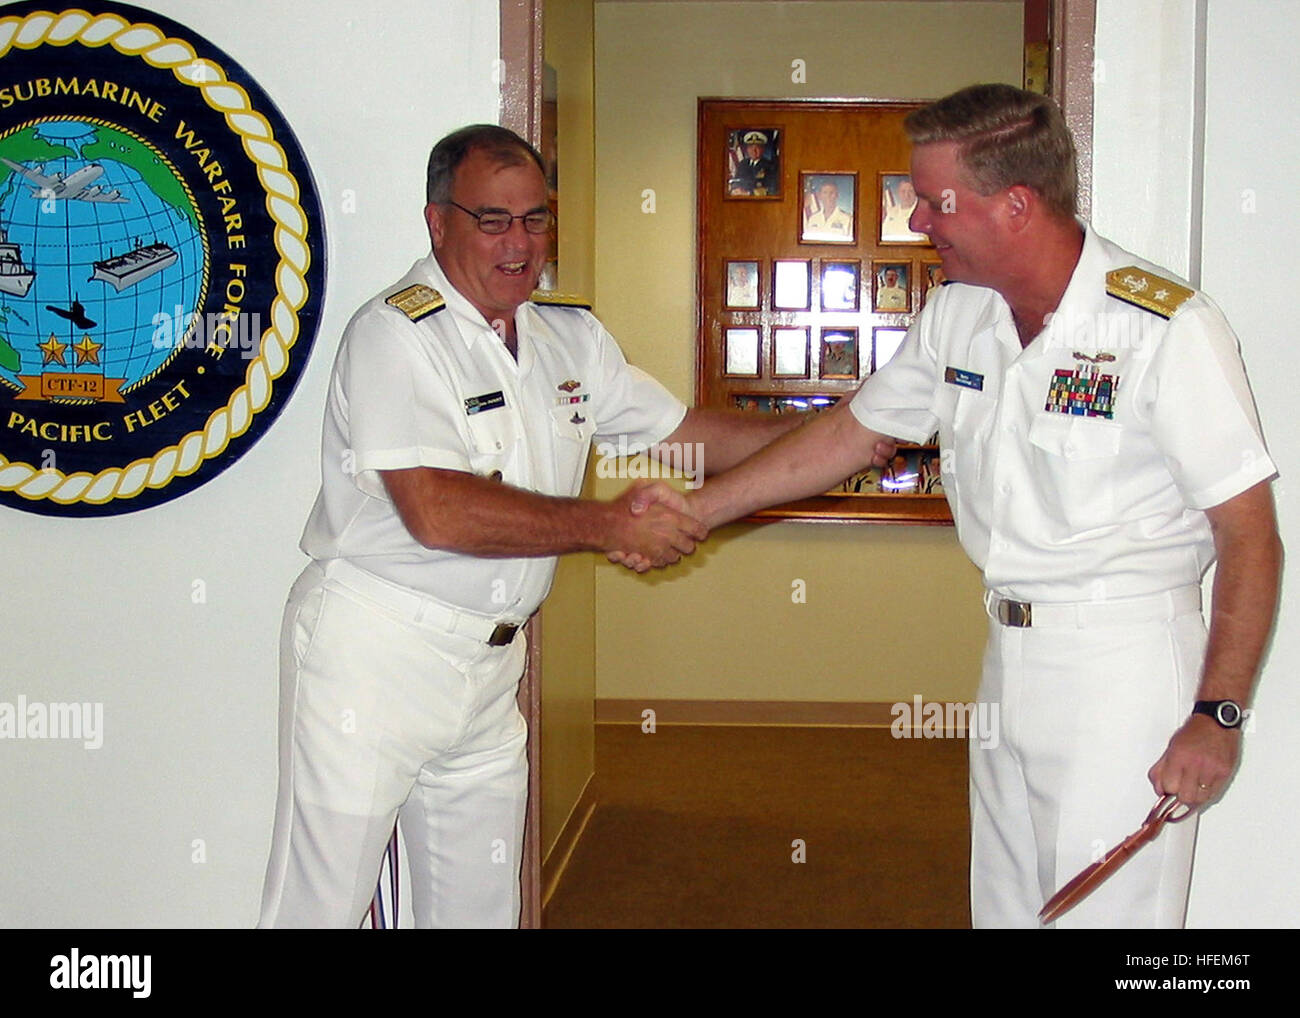 030604-N-0879R-001 Naval Station Pearl Harbor, Hawaii (Jun. 4, 2003) -- Rear Adm. John Padgett, Commander Submarine Force, U.S. Pacific Fleet (left) and Rear Adm. Barry McCullough, Commander, Navy Region Hawaii, officially open new office spaces for Commander Antisubmarine Warfare Force U.S. Pacific Fleet (CTF-12). CTF-12 exercises overall responsibility for the conduct of Theater USW and surveillance including tasking of assigned forces for the conduct of USW and Ocean surveillance and reconnaissance operations within assigned area of operations, normally under 3rd Fleet control, and operate  Stock Photo